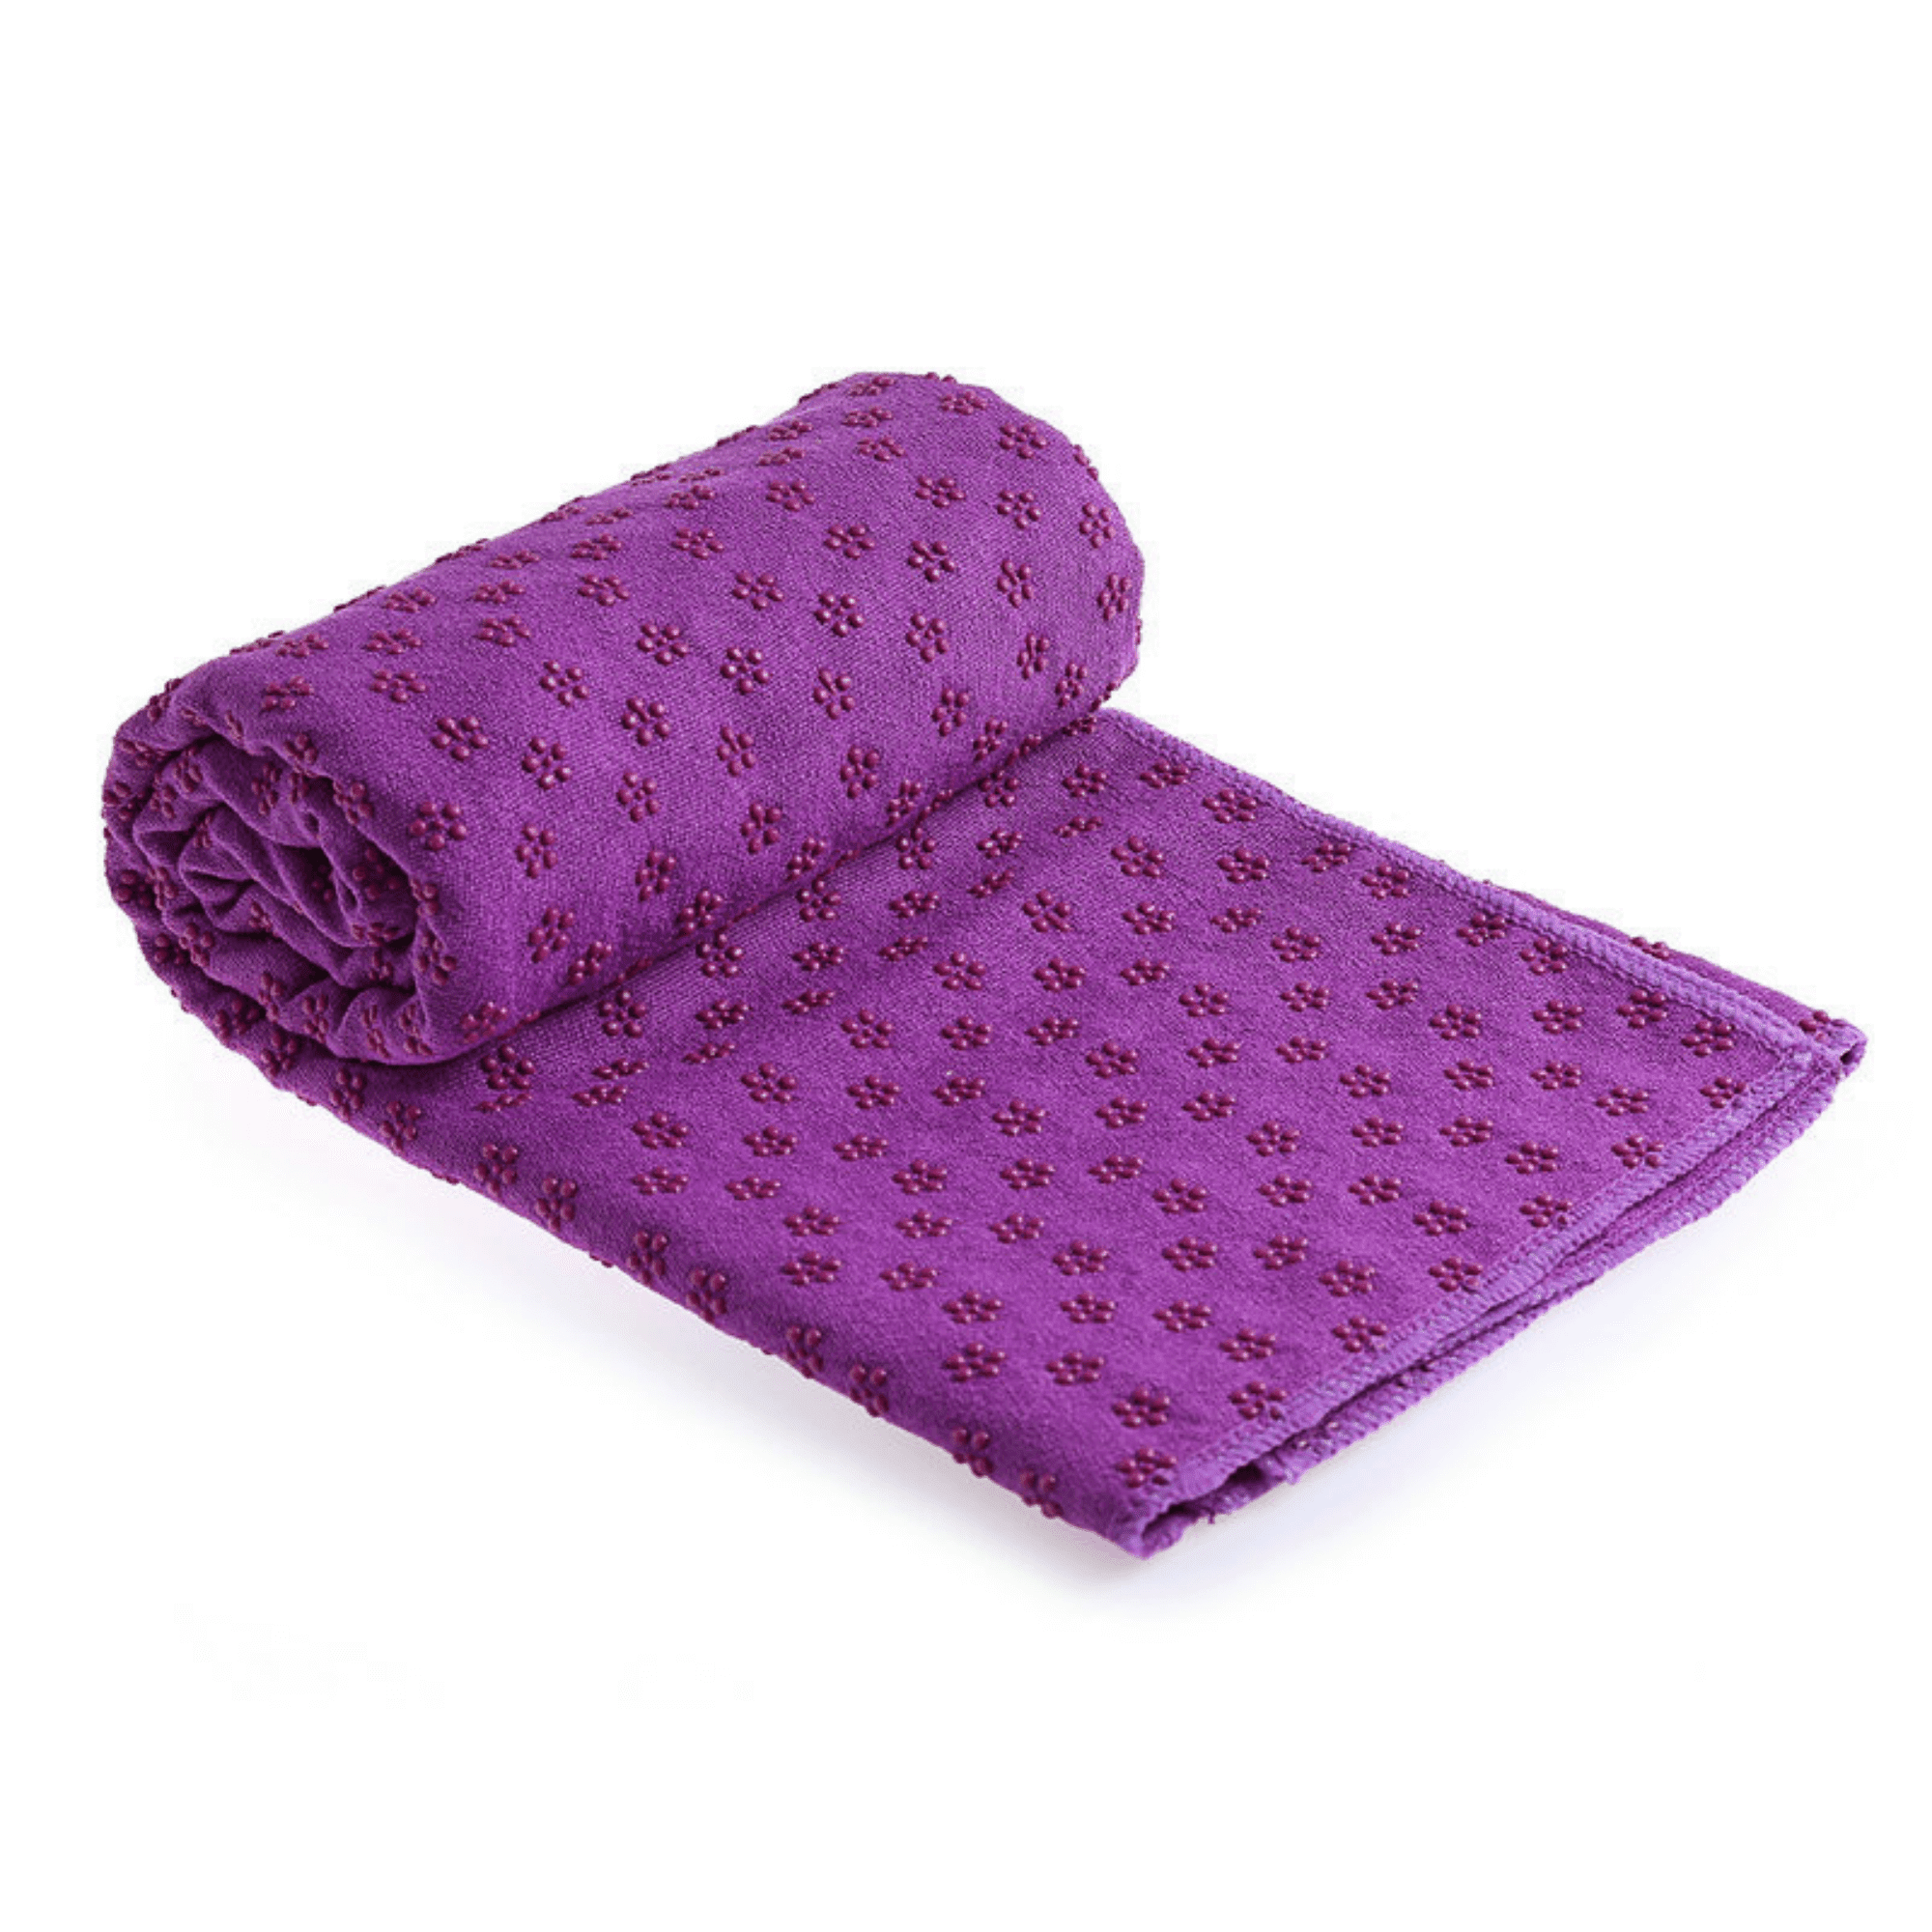 FormFit Purple Yoga Towel - 68-in x 24-in - Super Absorbent and